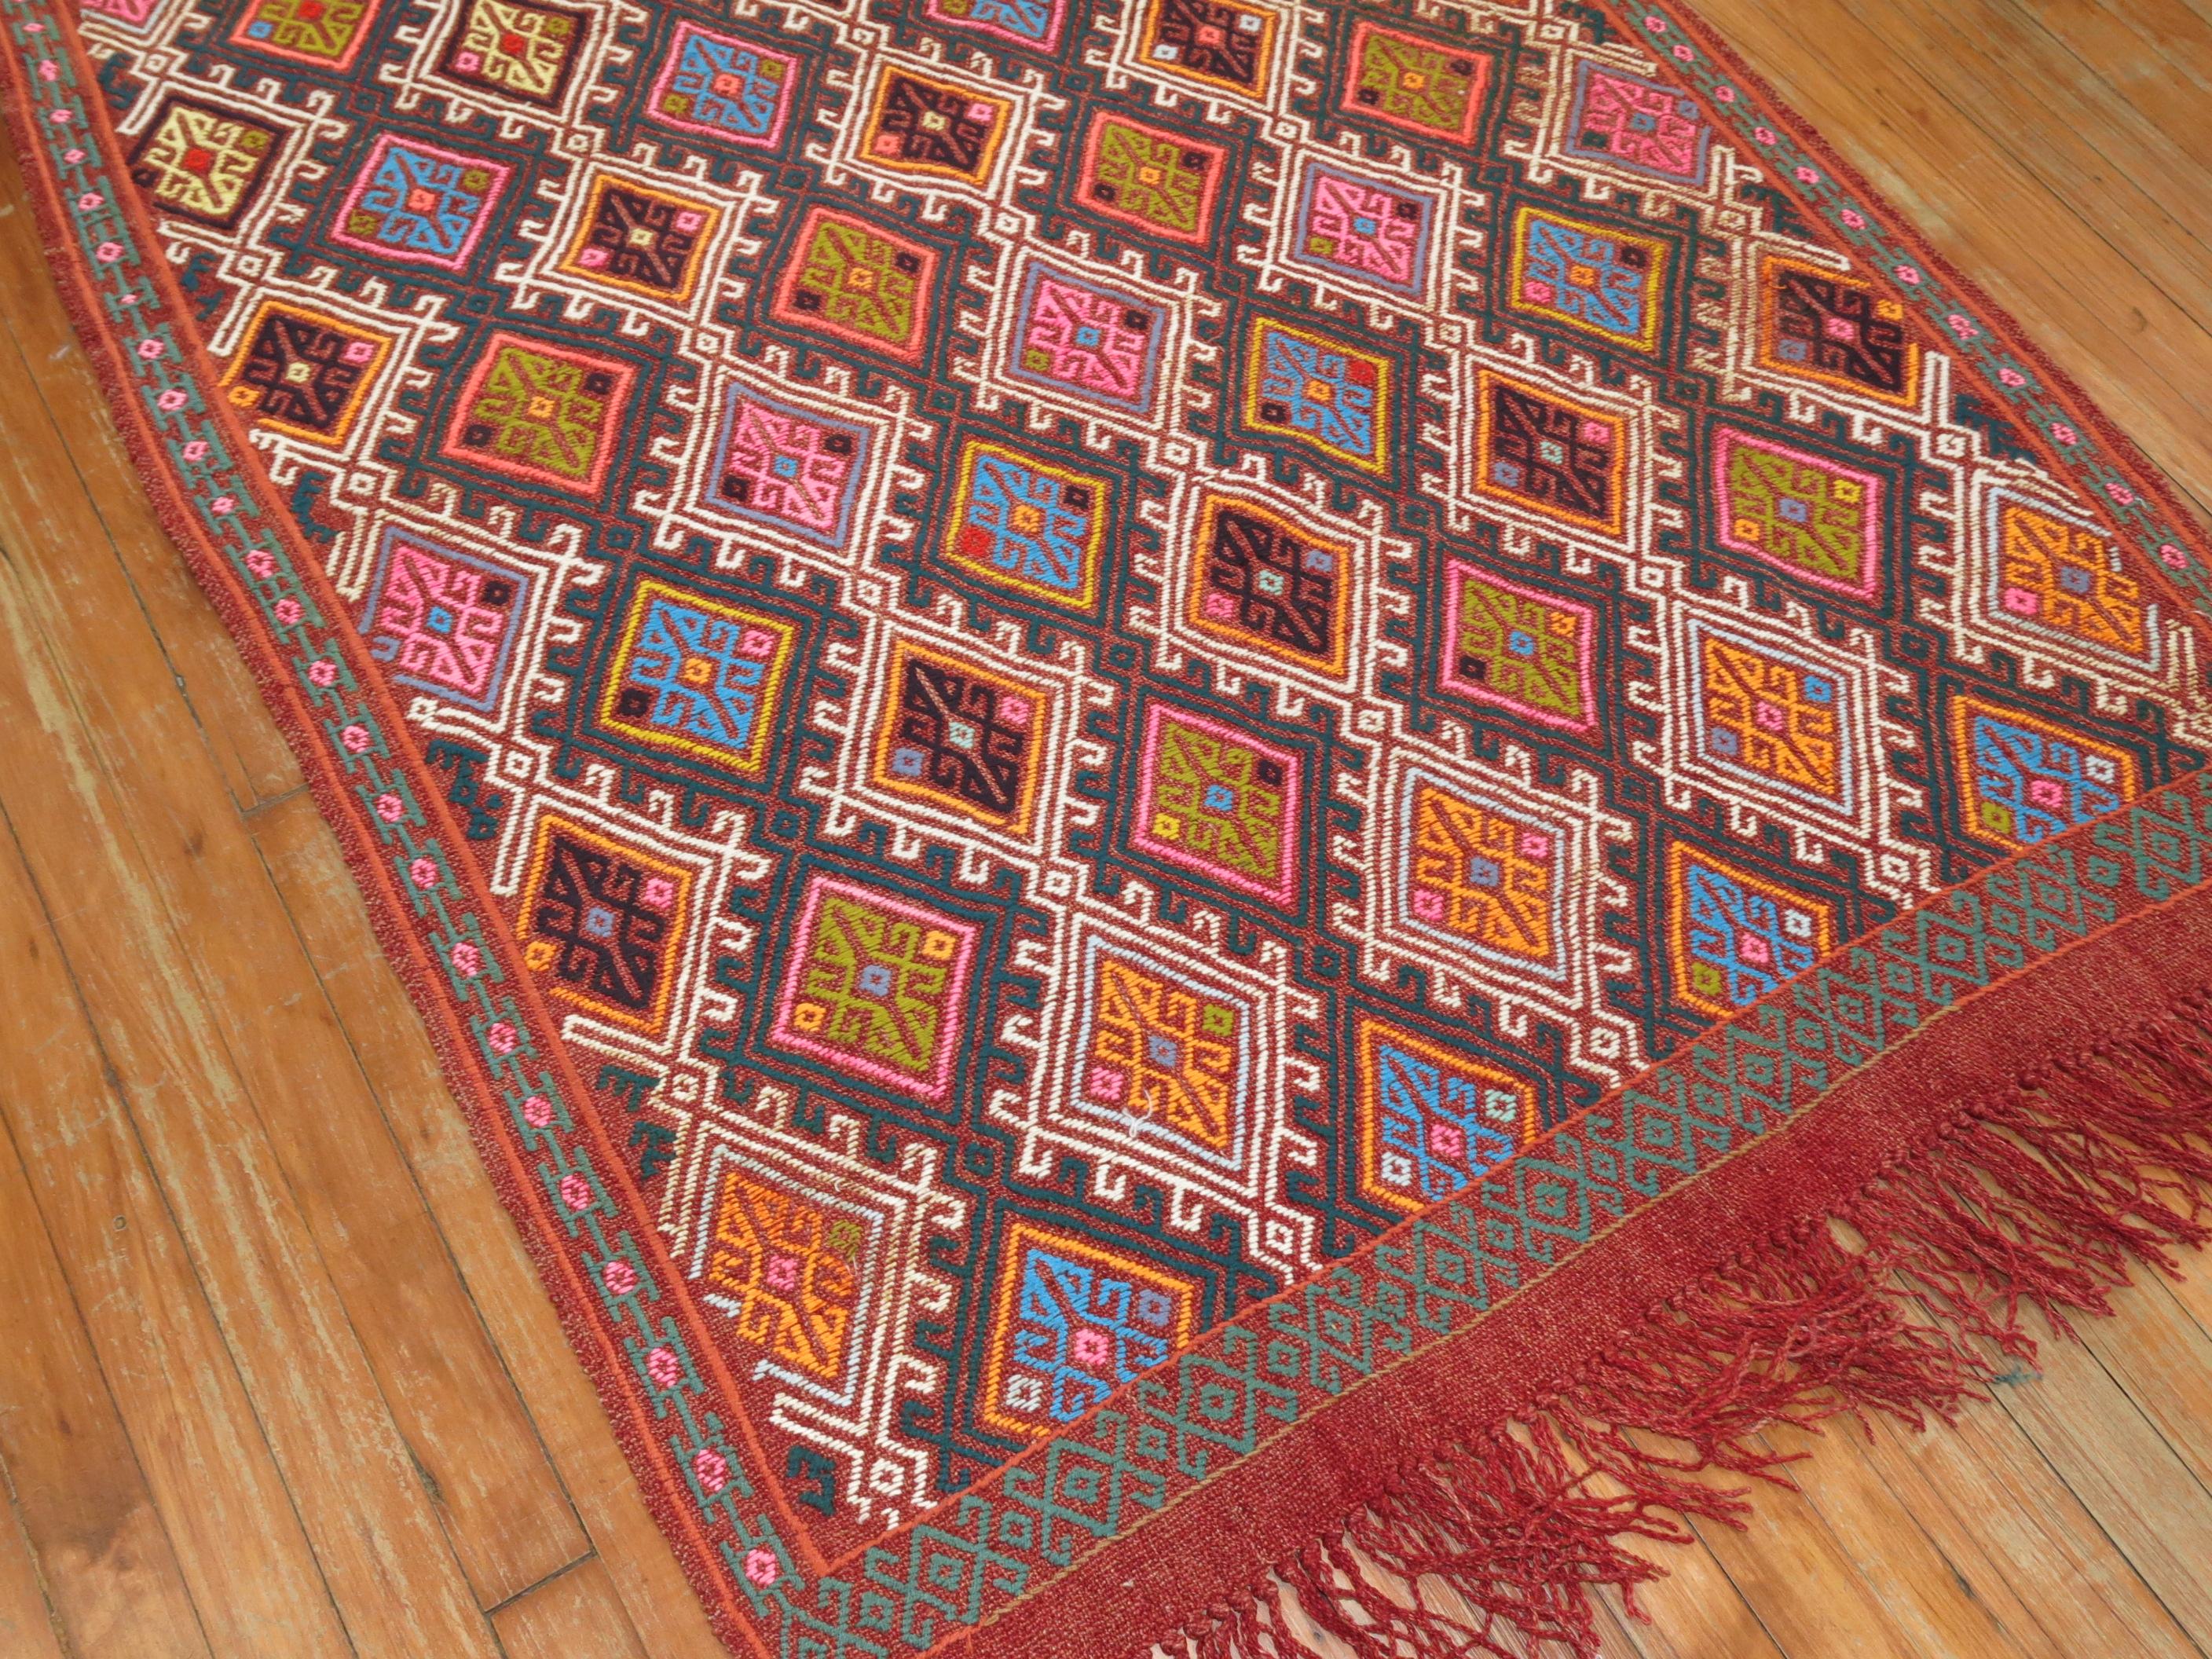 Colorful midcentury Turkish Jajim. Dominant Accents in bright pink, orange, electric blue

Measures: 3'8” x 6'9”

With the Jijim weaving technique, different colored threads are applied between the weft and warp threads, on the reverse of the